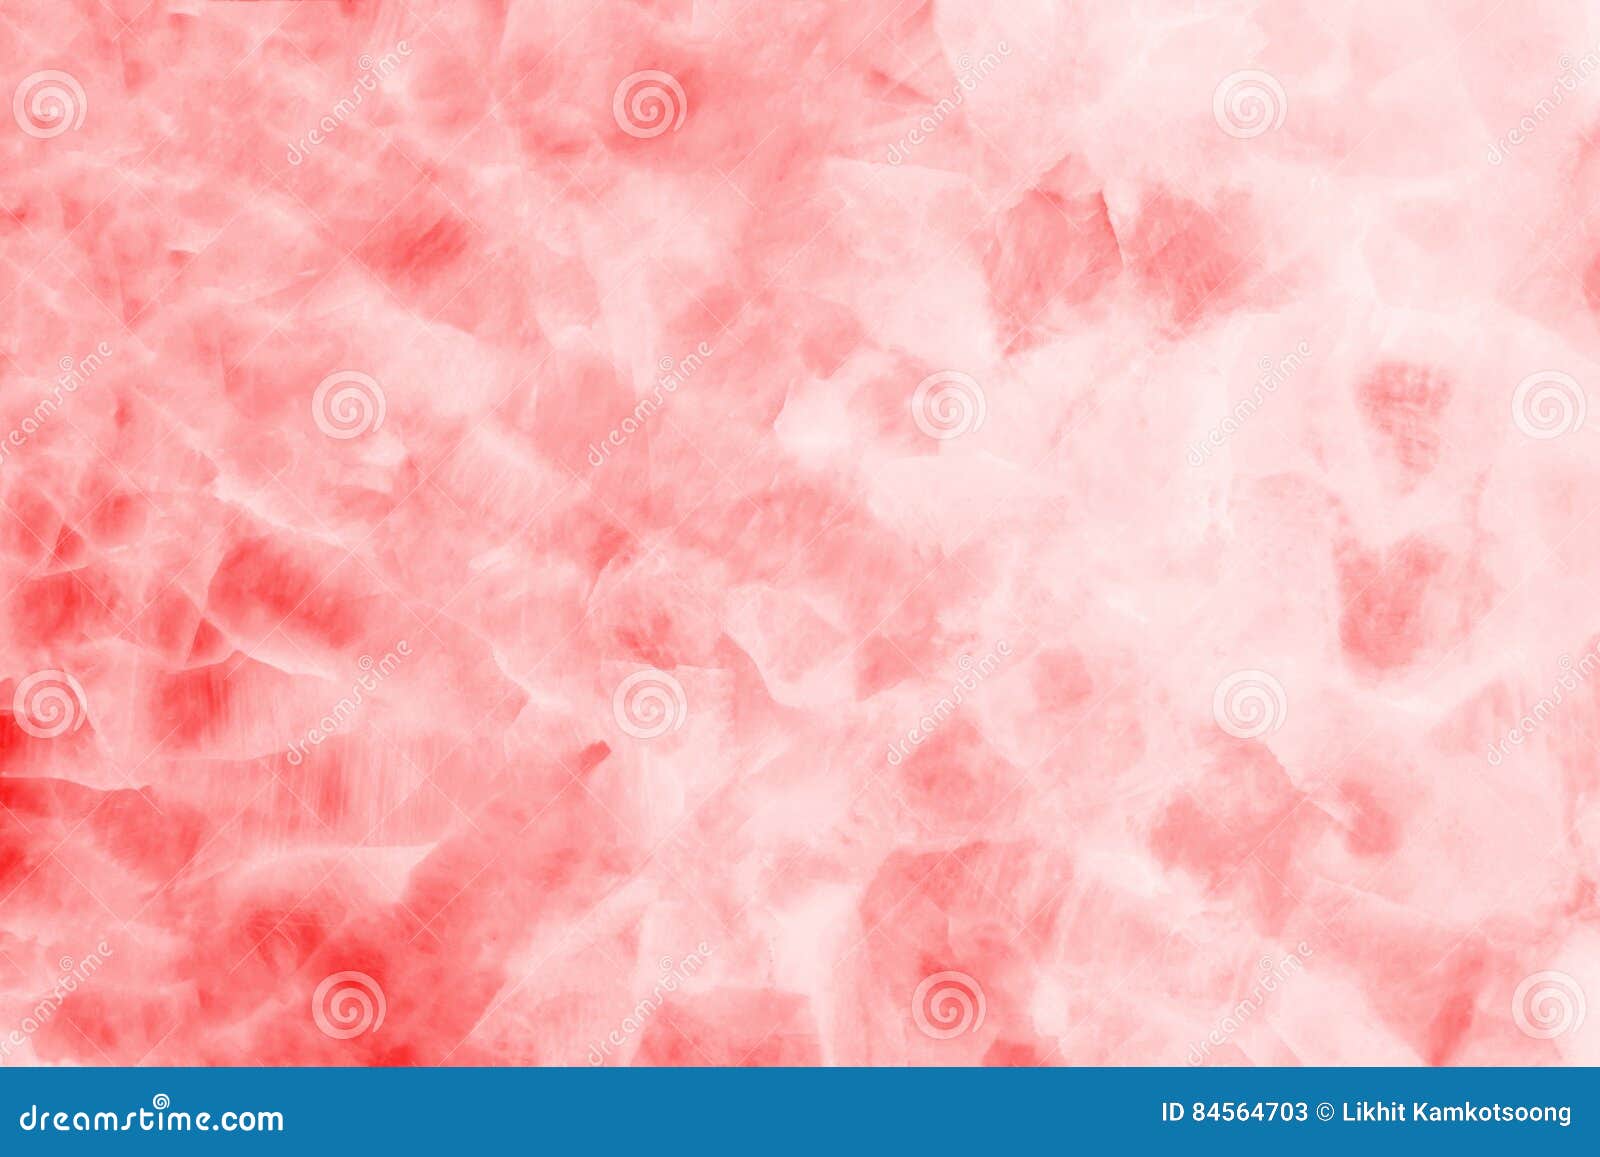 Pink Marble Texture Background / Marble Texture Background Floor ...